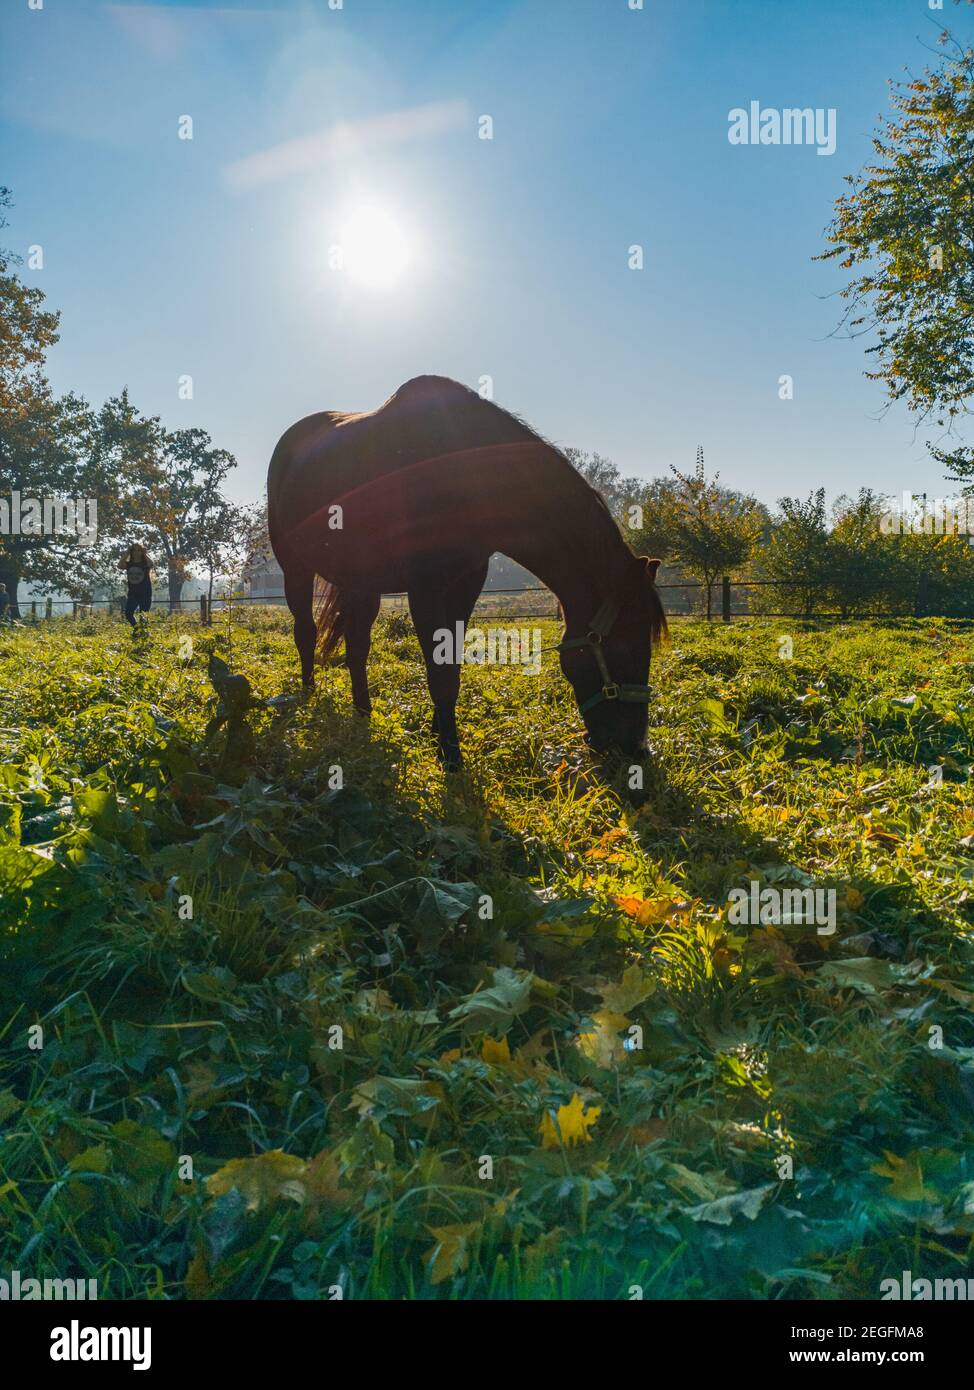 Big brown horse with shadow and shining sun behind Stock Photo